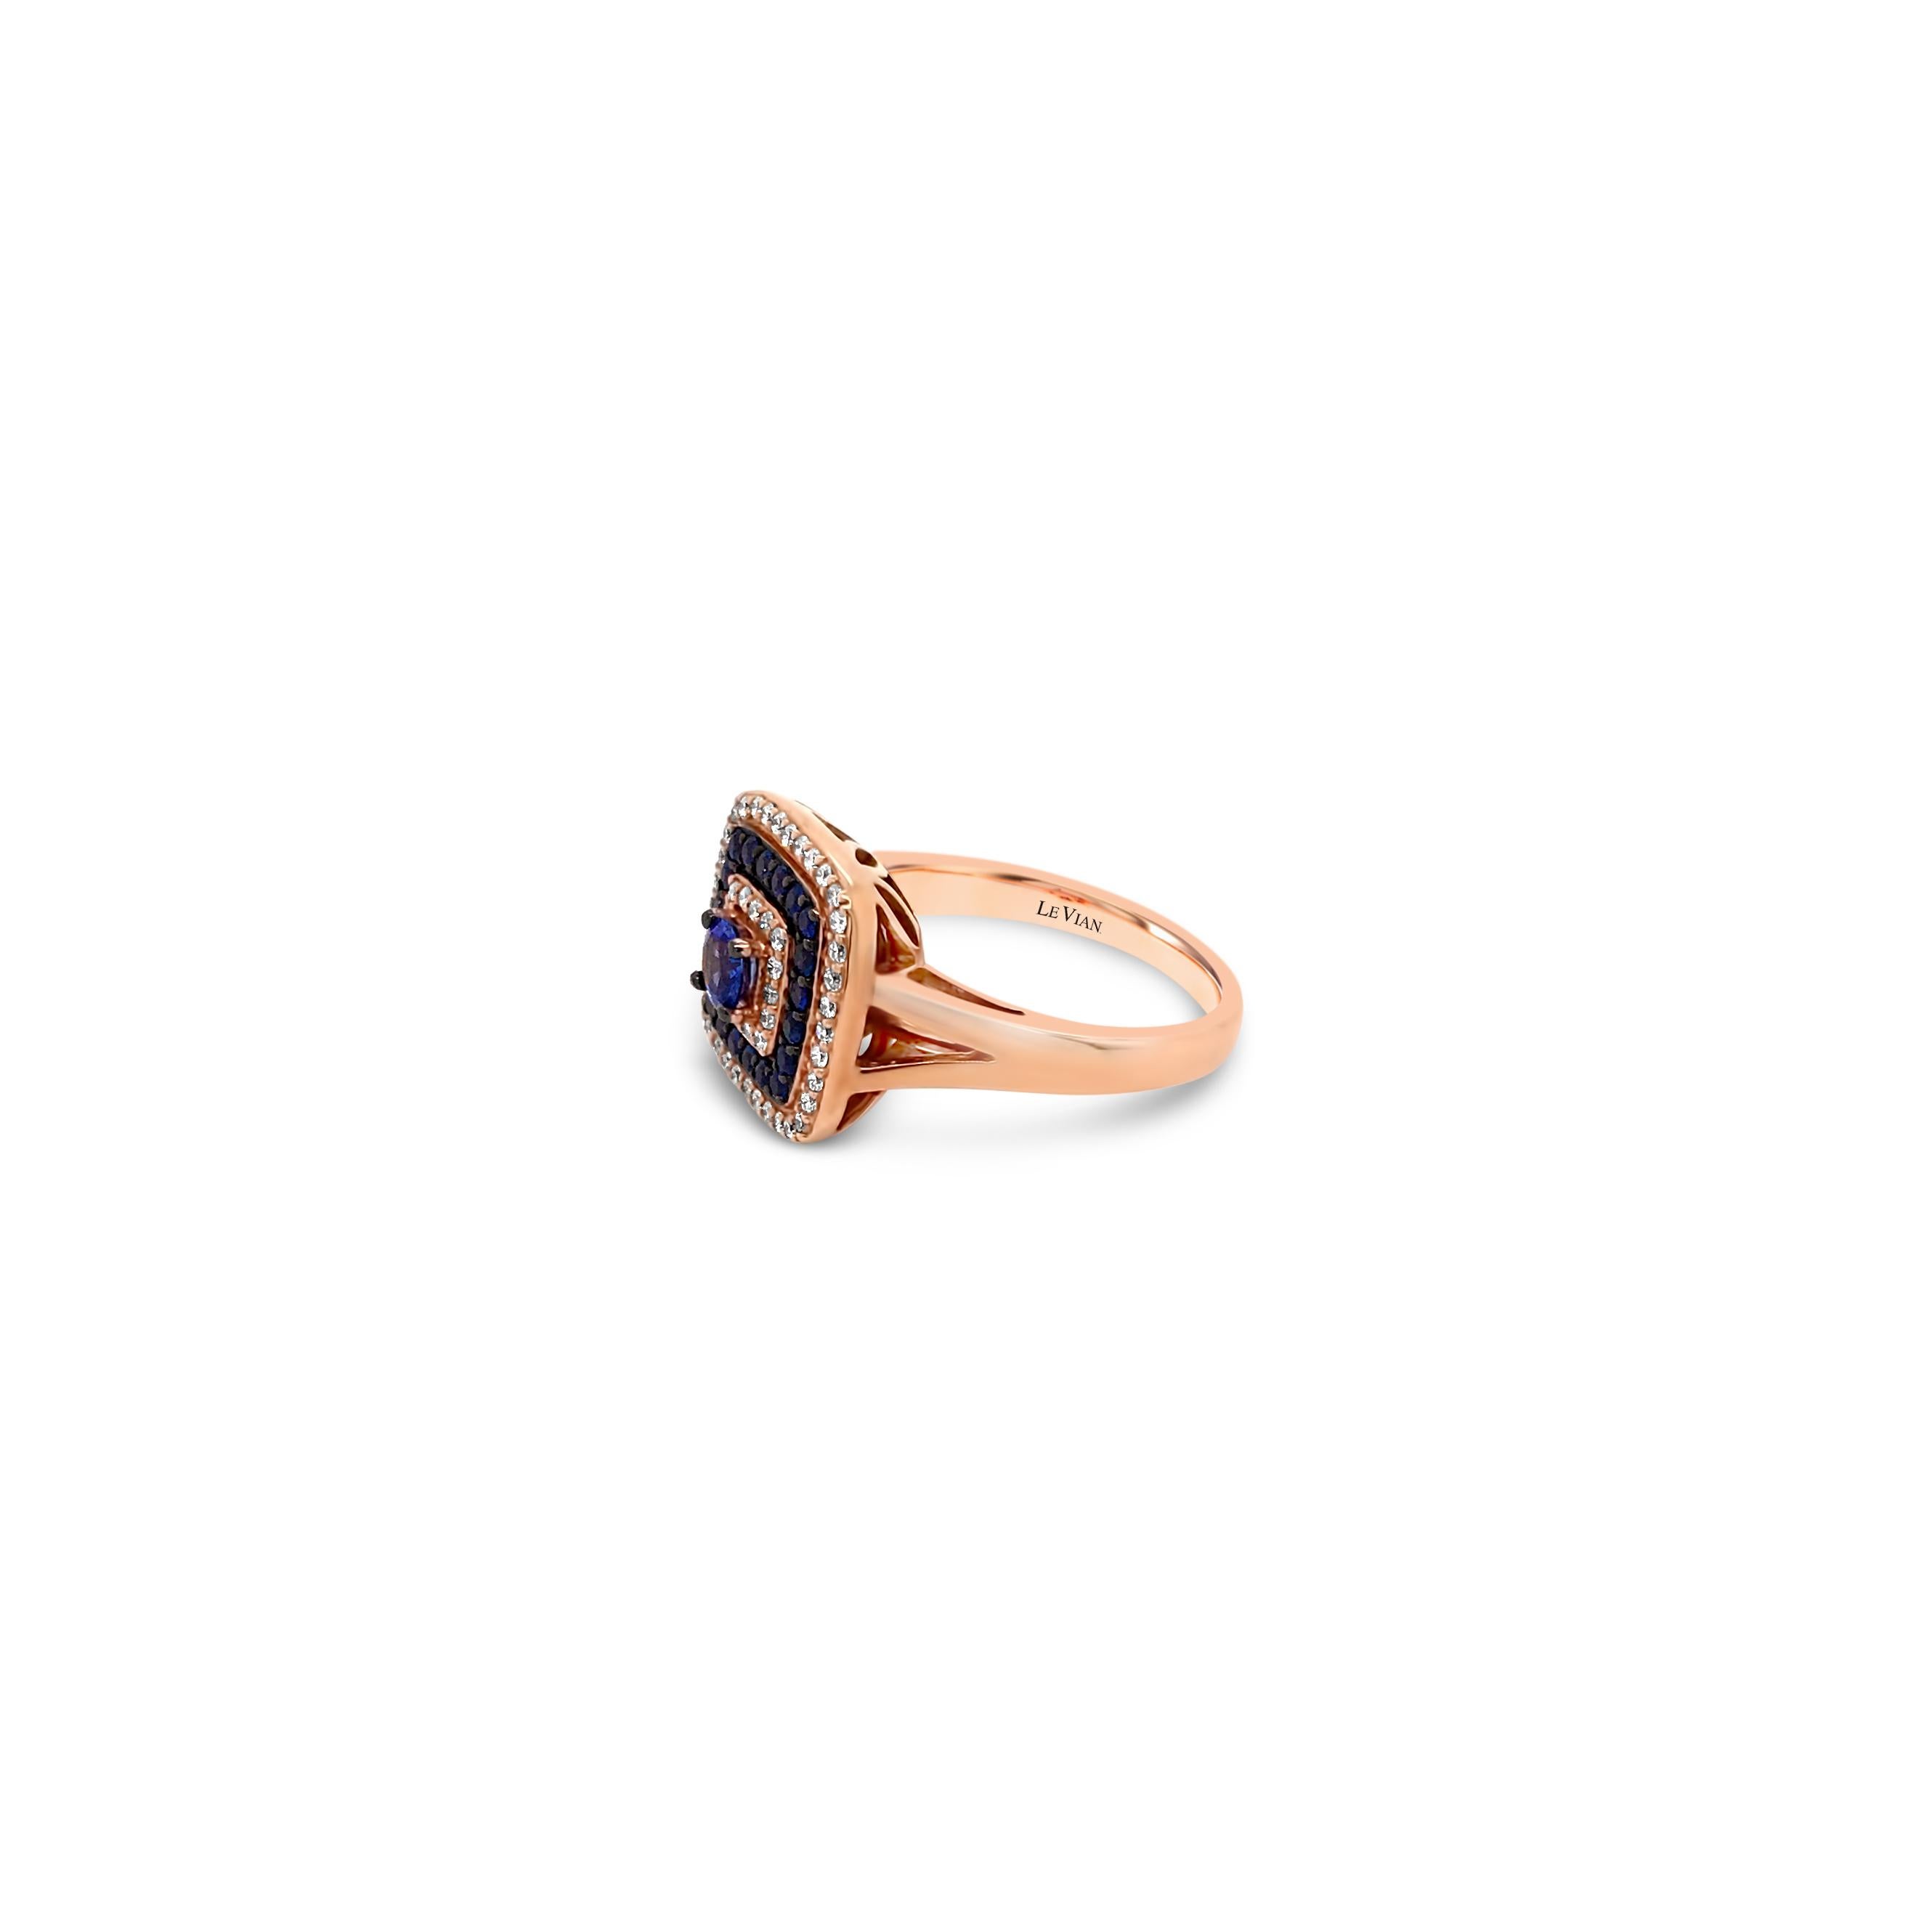 Le Vian® Ring featuring 1/2 cts. Blueberry Sapphire™, 1/4 cts. Vanilla Diamonds®  set in 14K Strawberry Gold®
